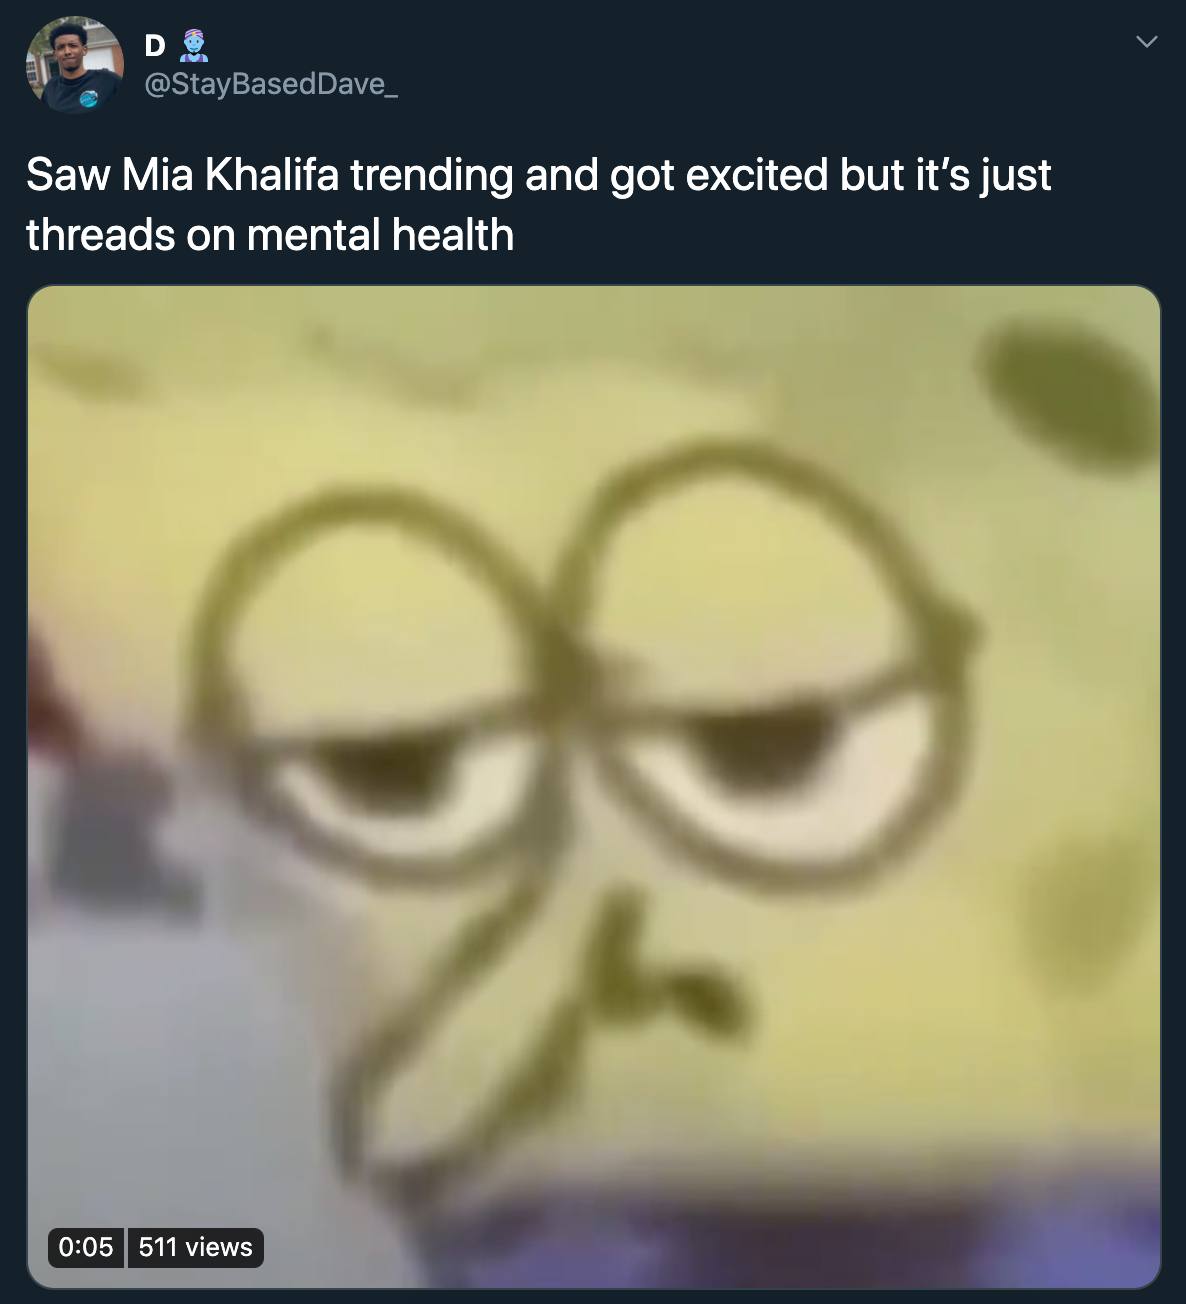 Saw Mia Khalifa trending and got excited but it's just threads on mental health